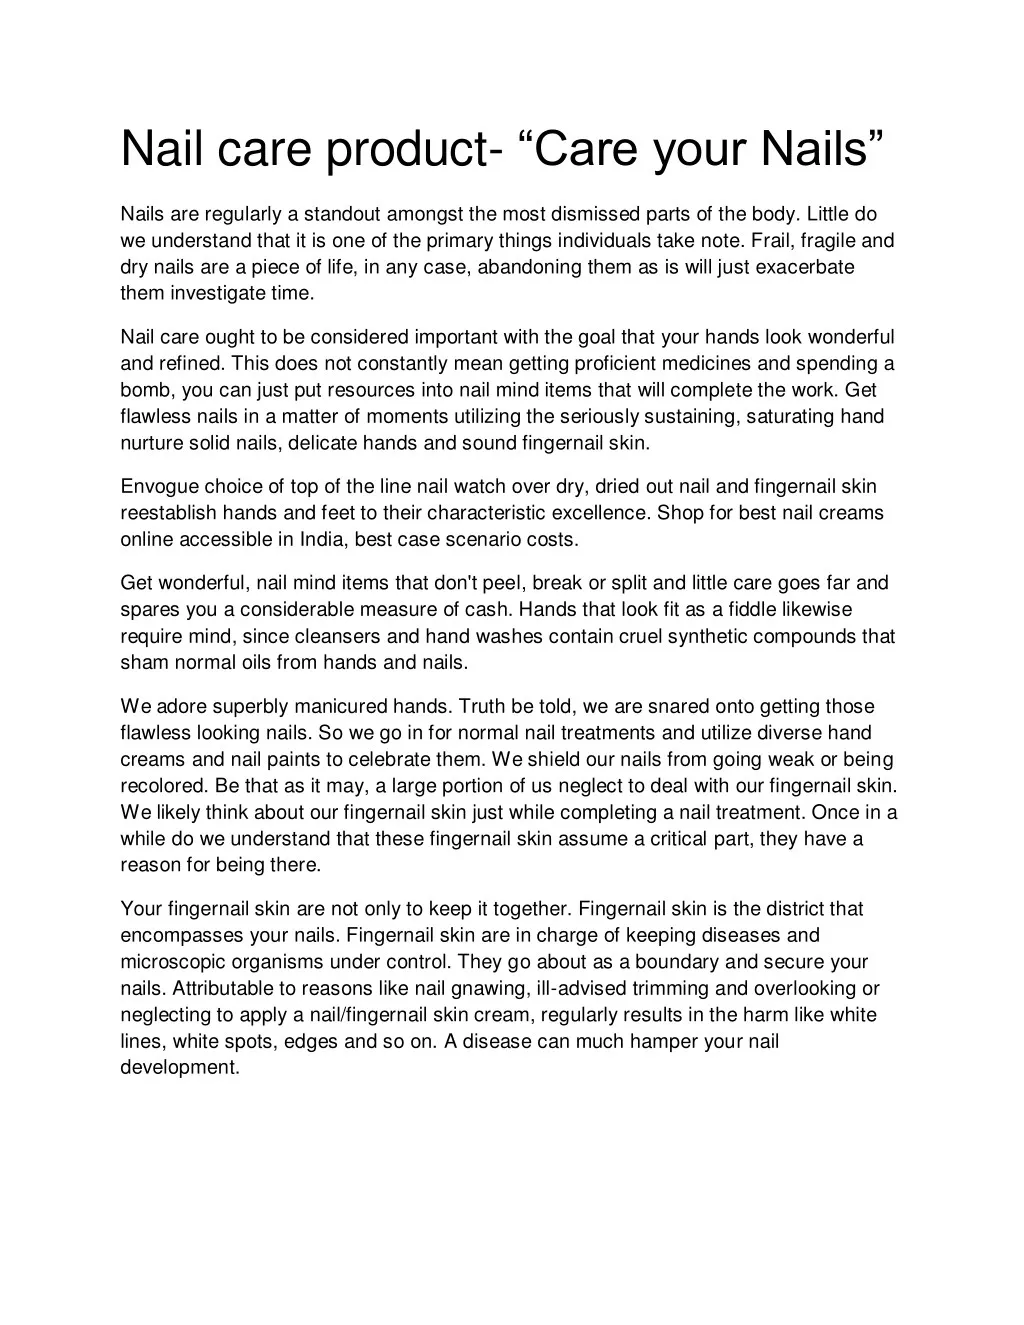 nail care product care your nails